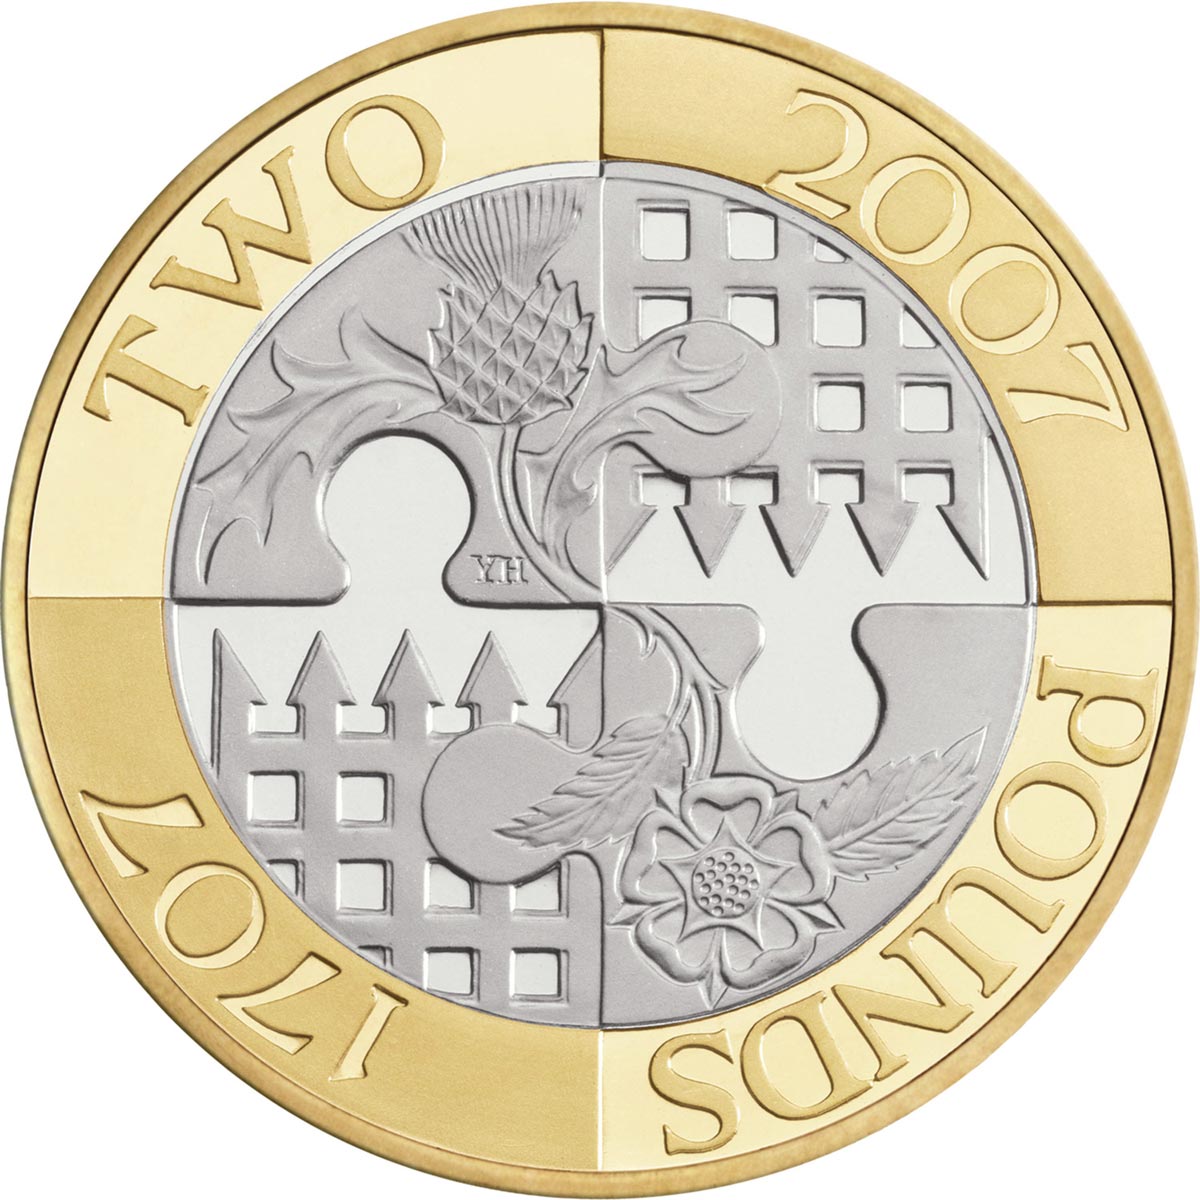 Image of 2 pounds coin - Tercentenary of the Acts of Union 1707 | United Kingdom 2007.  The Bimetal: CuNi, nordic gold coin is of Proof, BU, UNC quality.